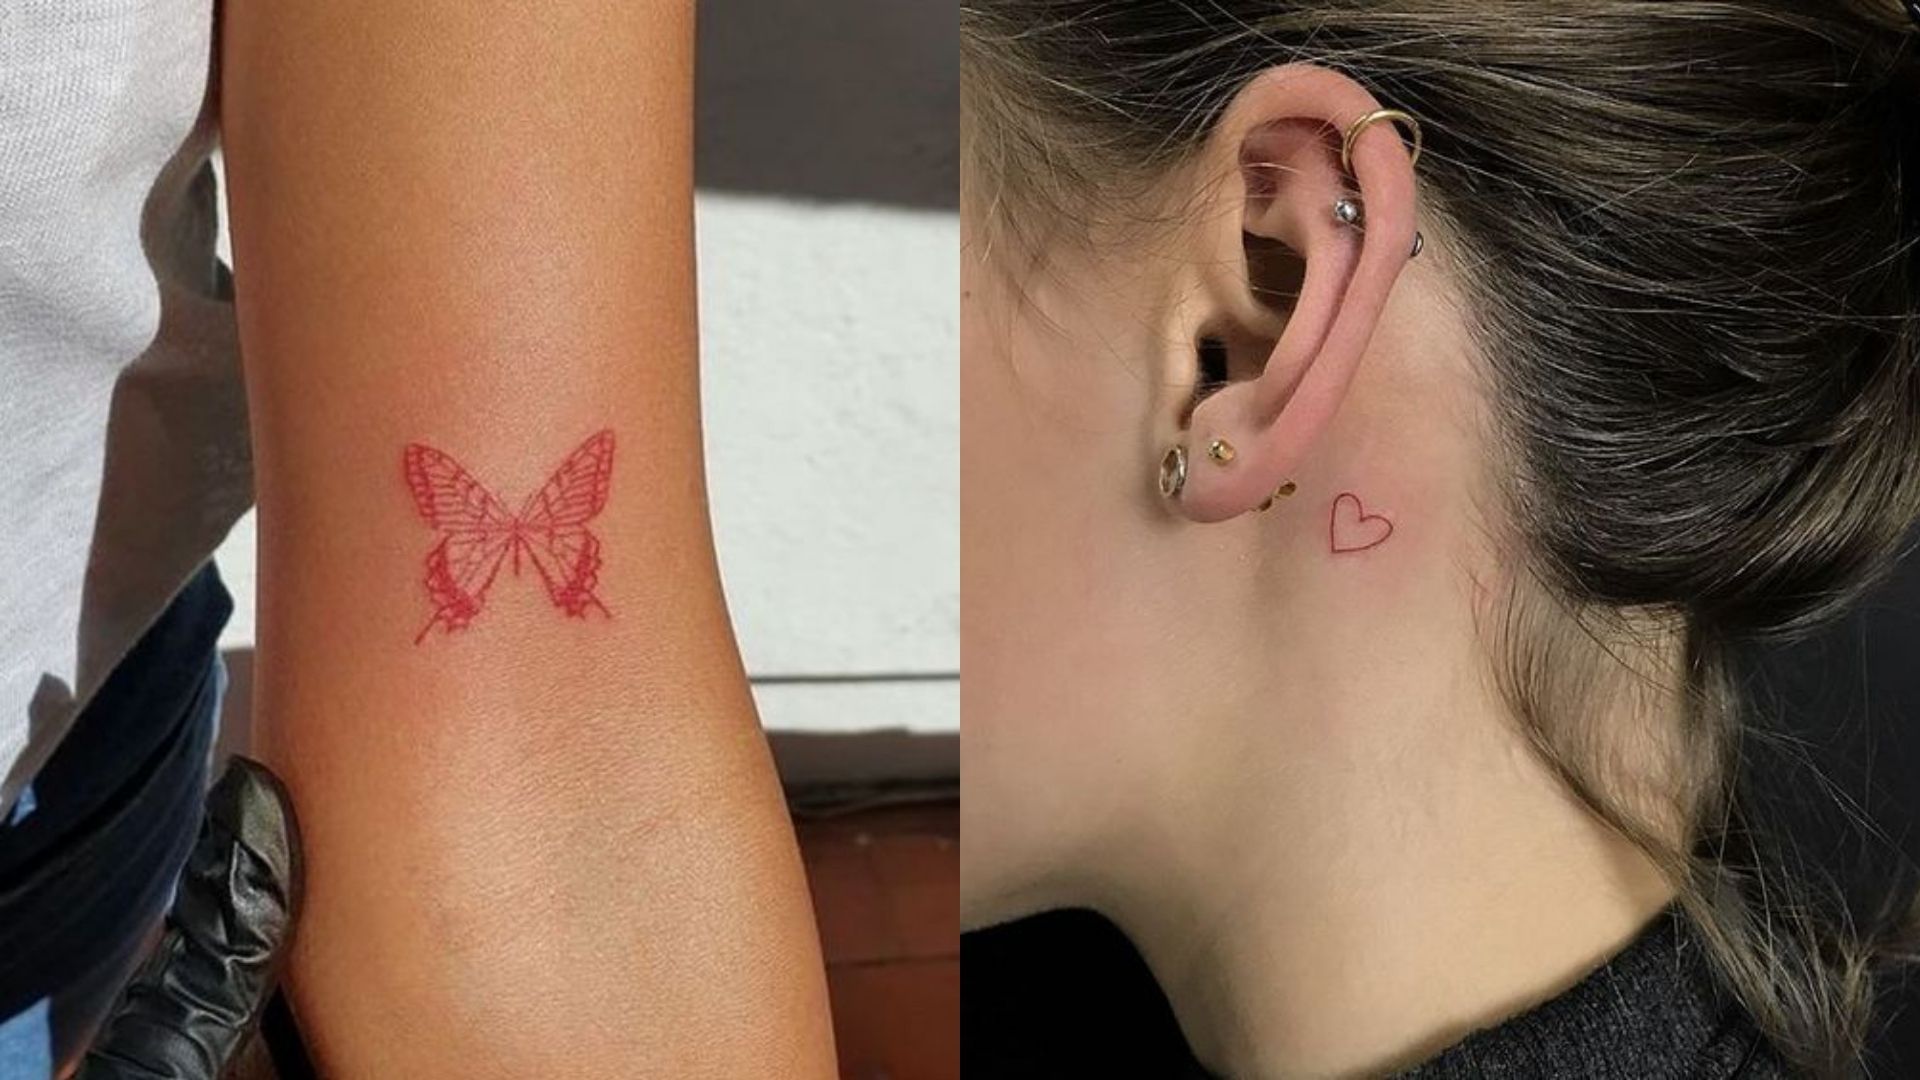 Simple Tattoo Design For Girls  Small Tattoo Designs  Blossom Trends   YouTube